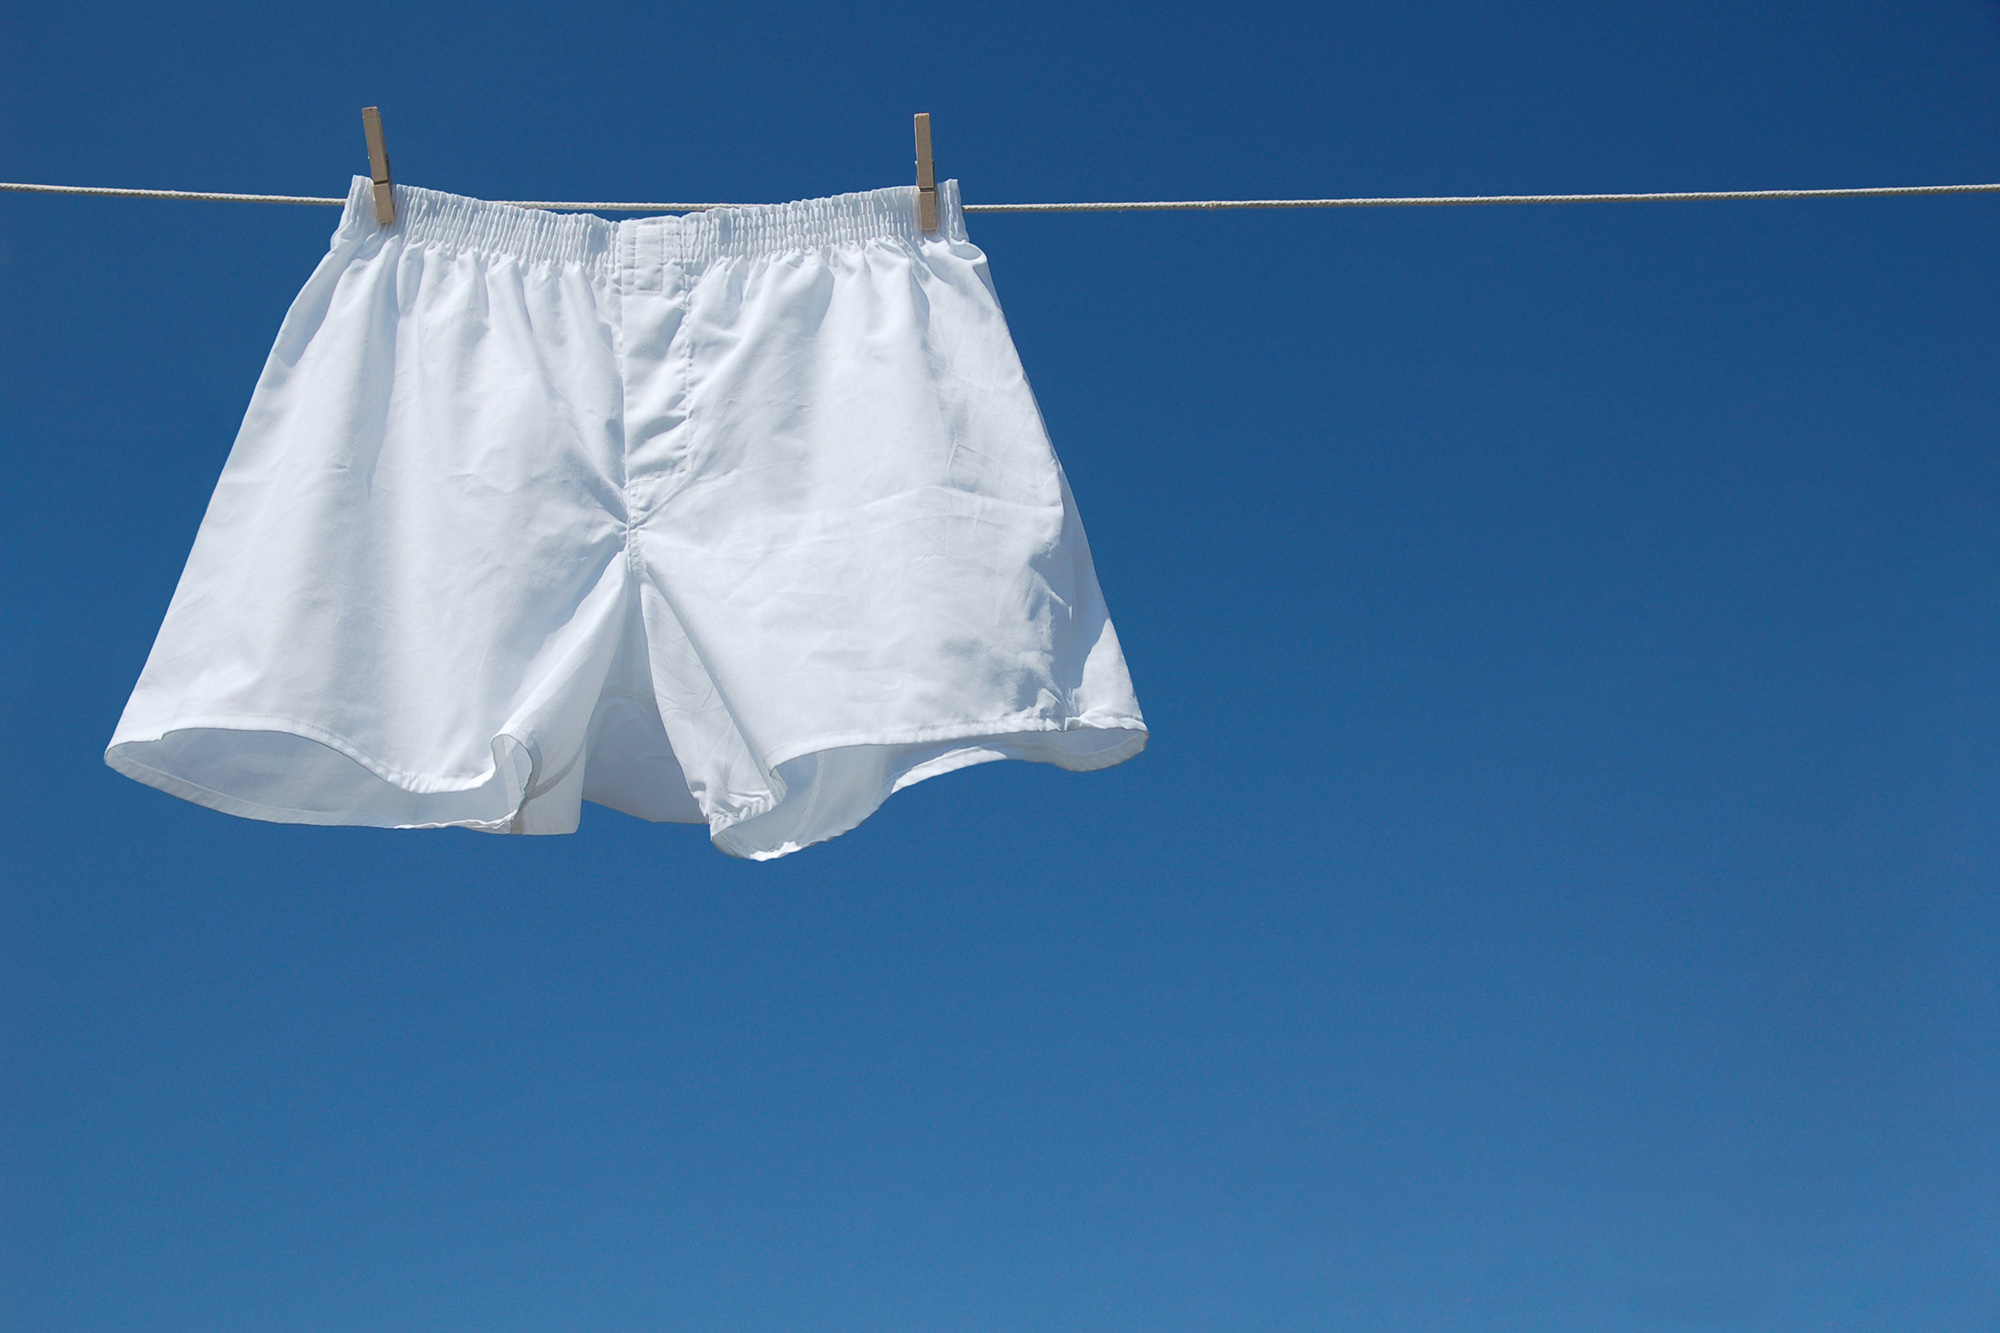 doreen gunderson recommends cuming in boxers pic